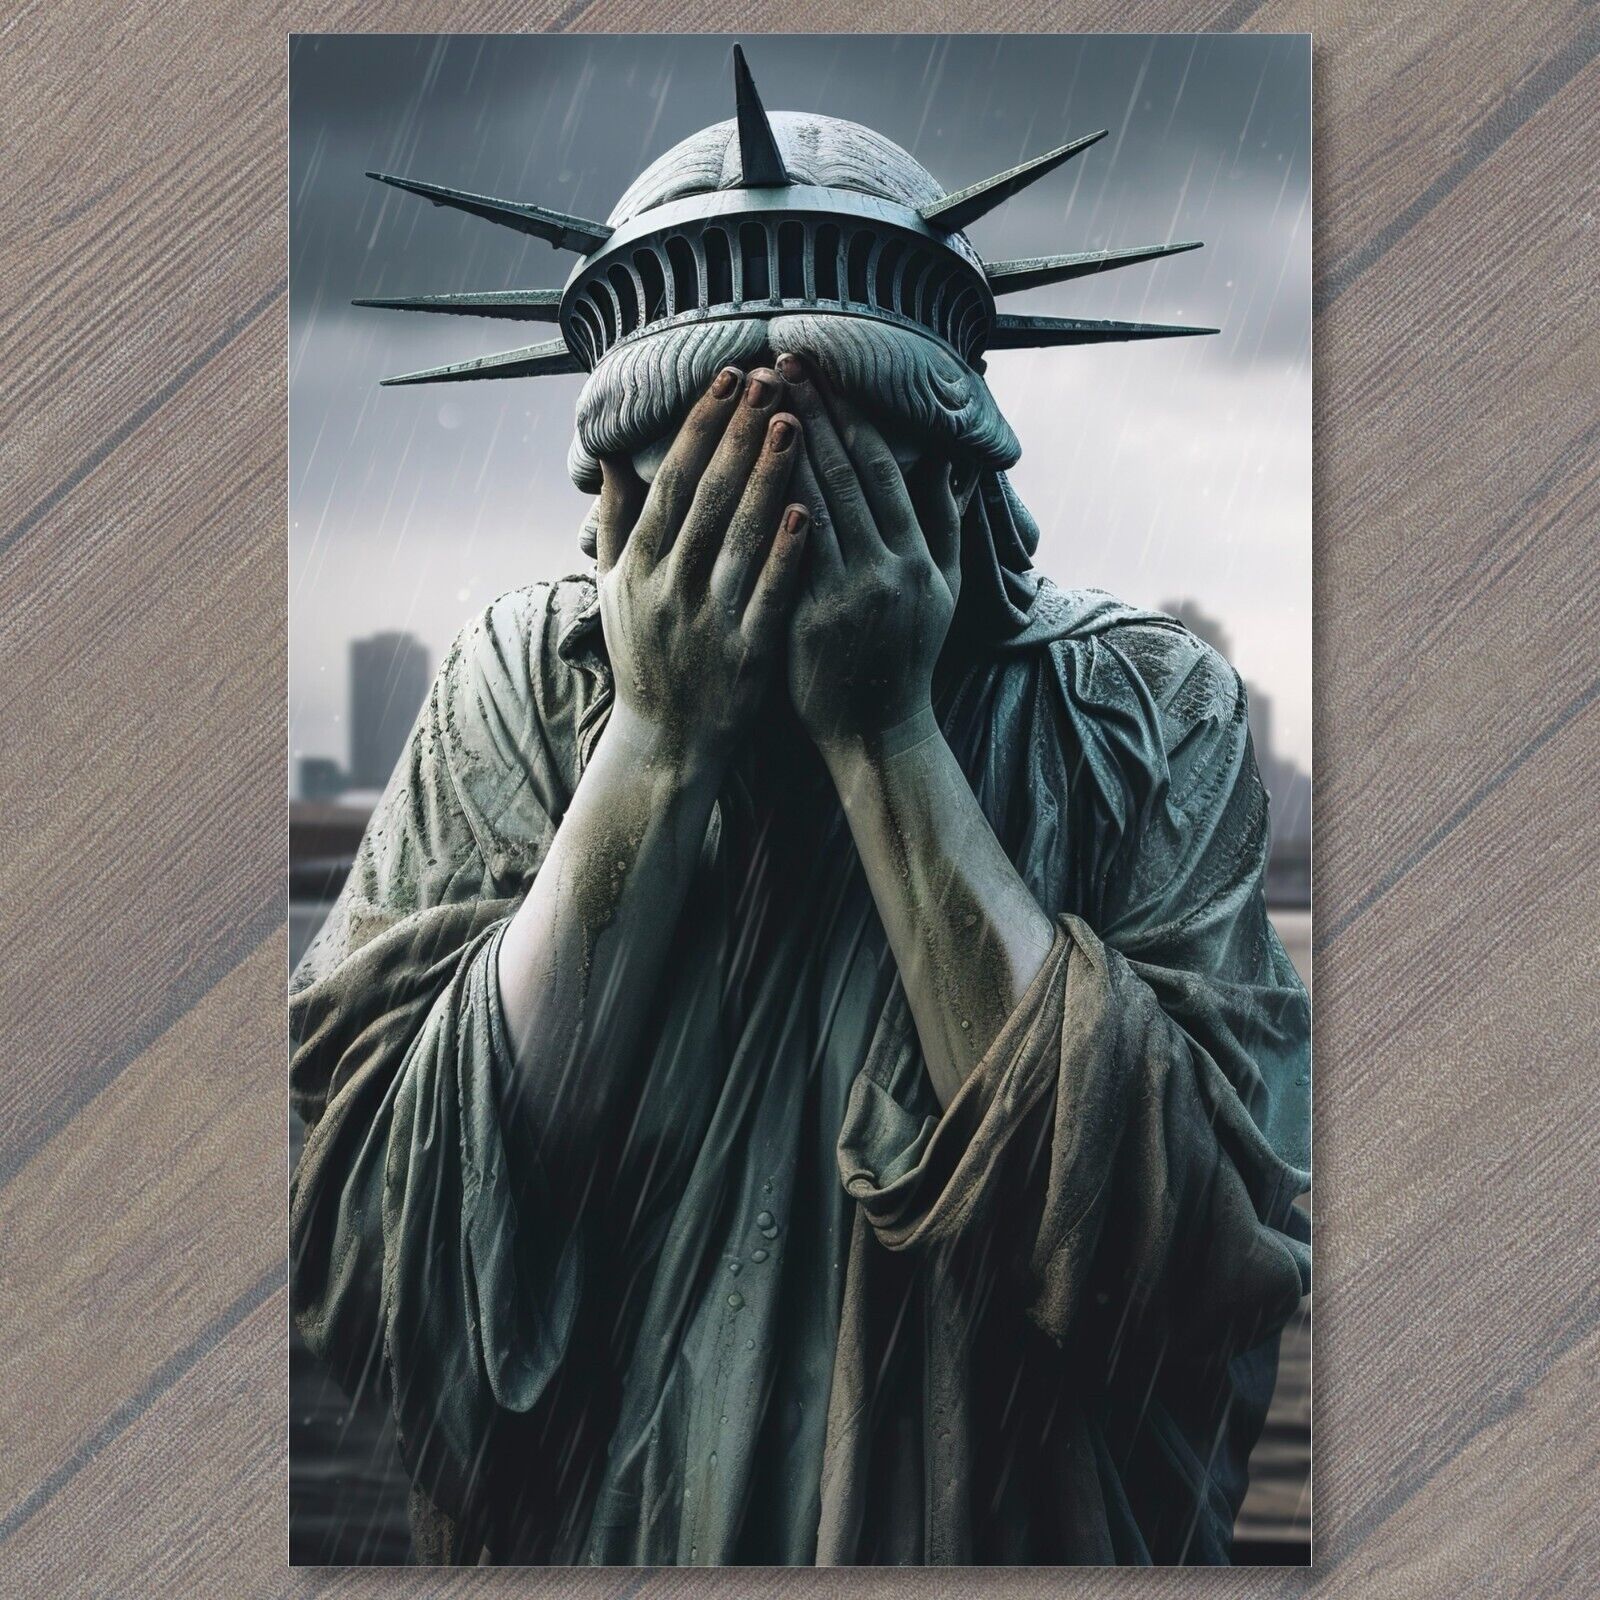 Postcard Sorrowful Statue of Liberty Weeps in the Rain, City Background New York